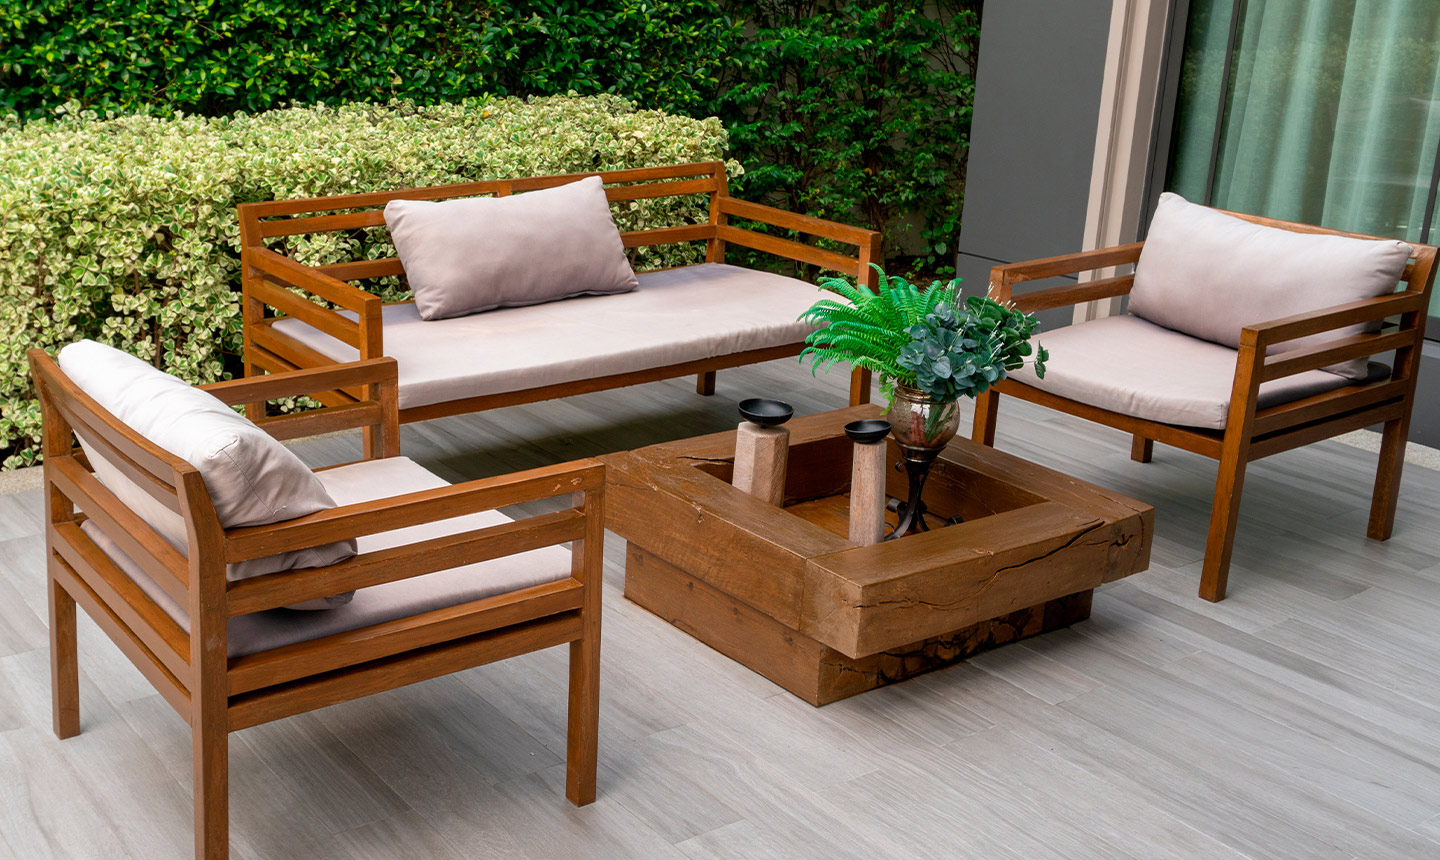 Discover how to polish your garden furniture